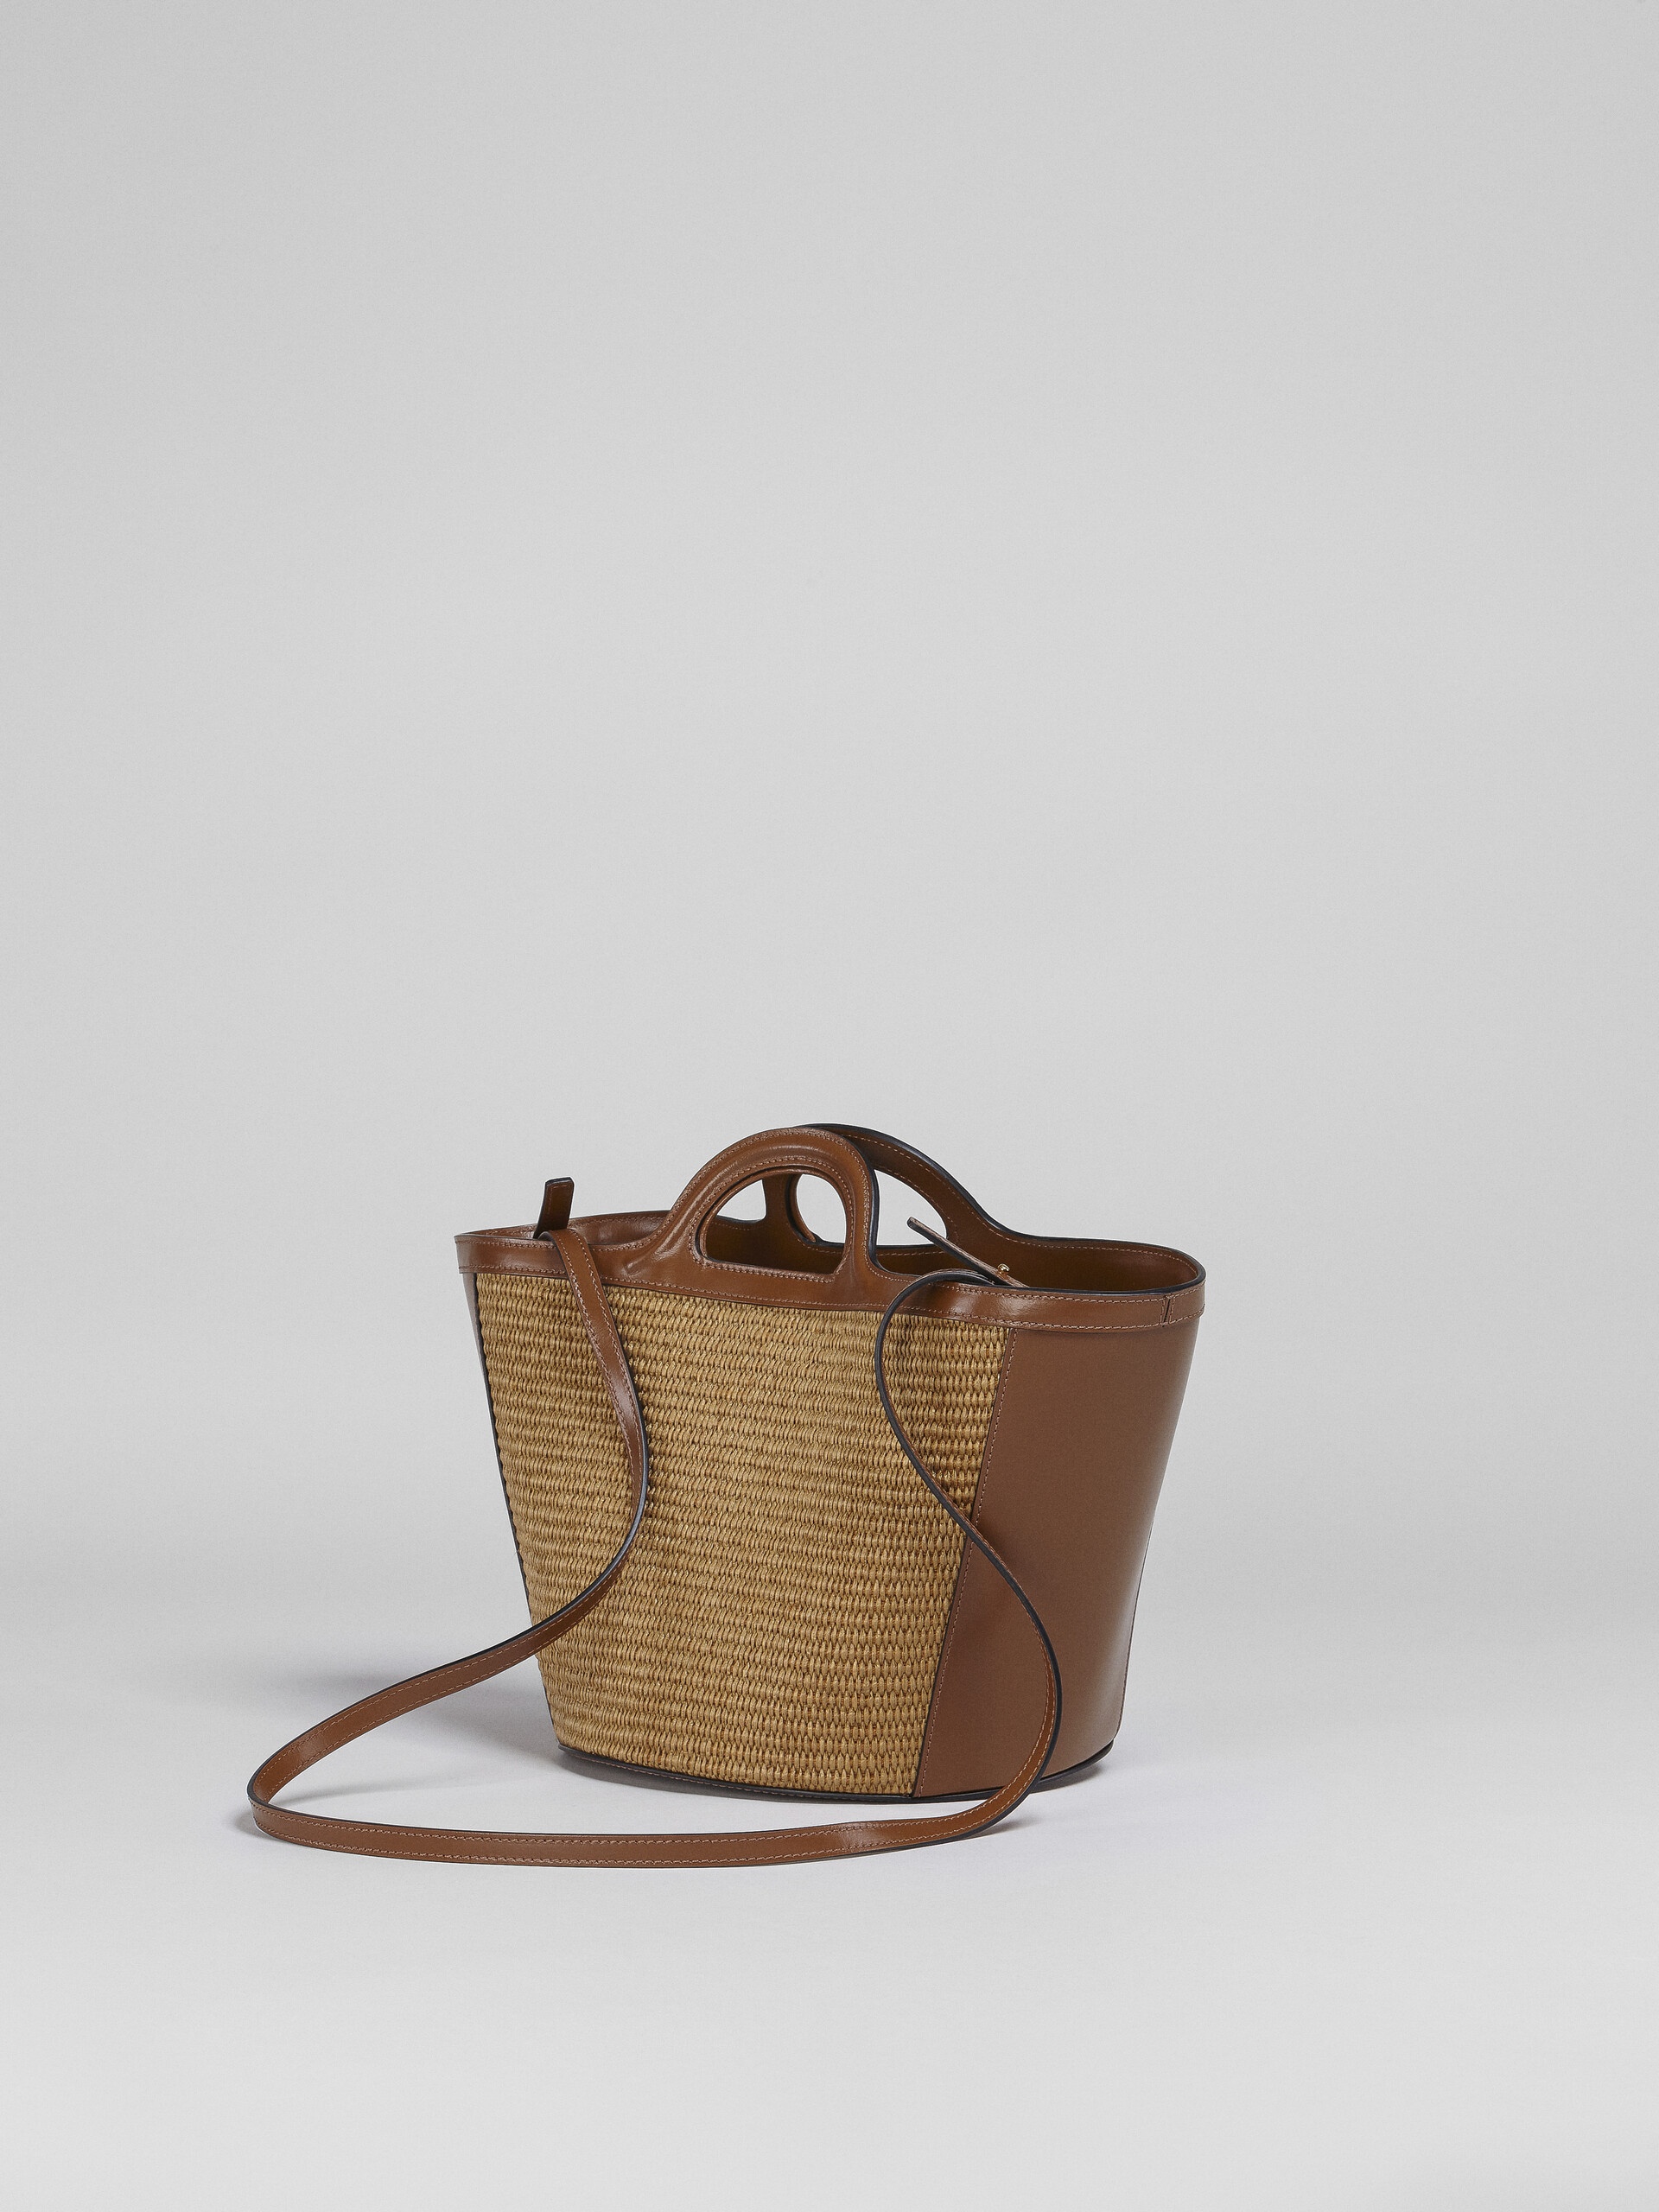 TROPICALIA SMALL BAG IN BROWN LEATHER AND RAFFIA - 3